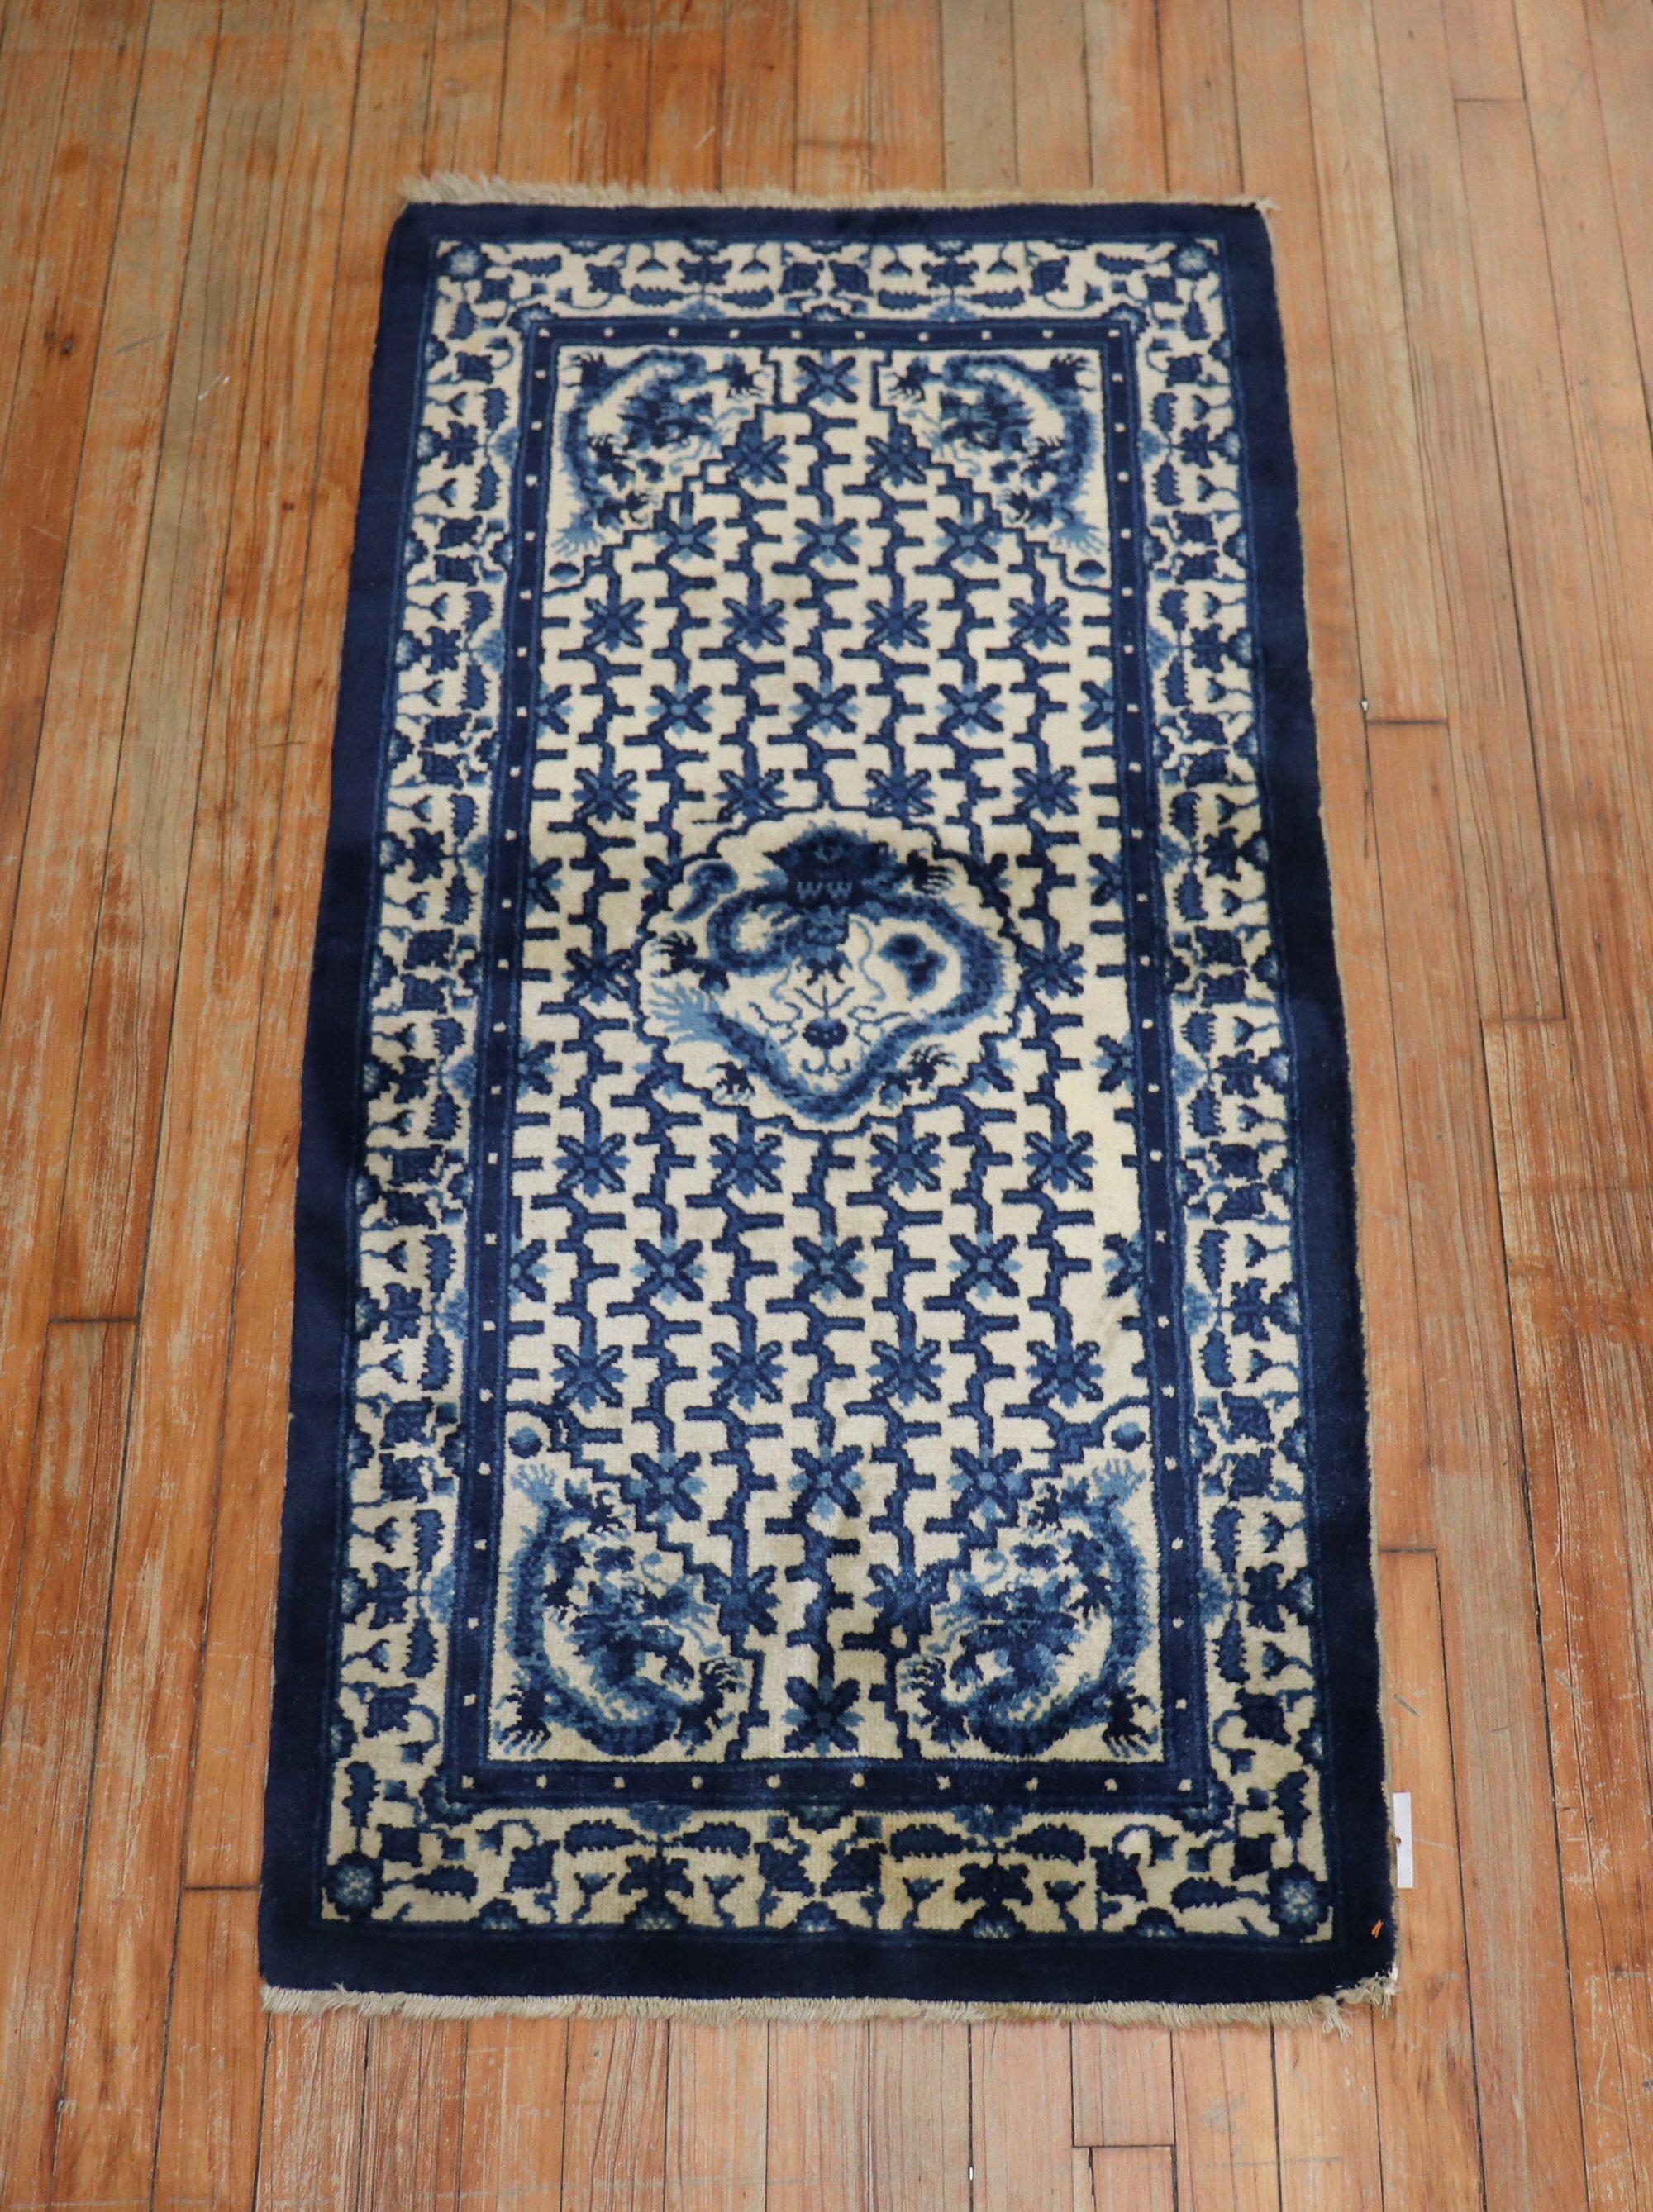 20th Century Tan Blue Chinese Scatter Size Dragon Medallion Rug